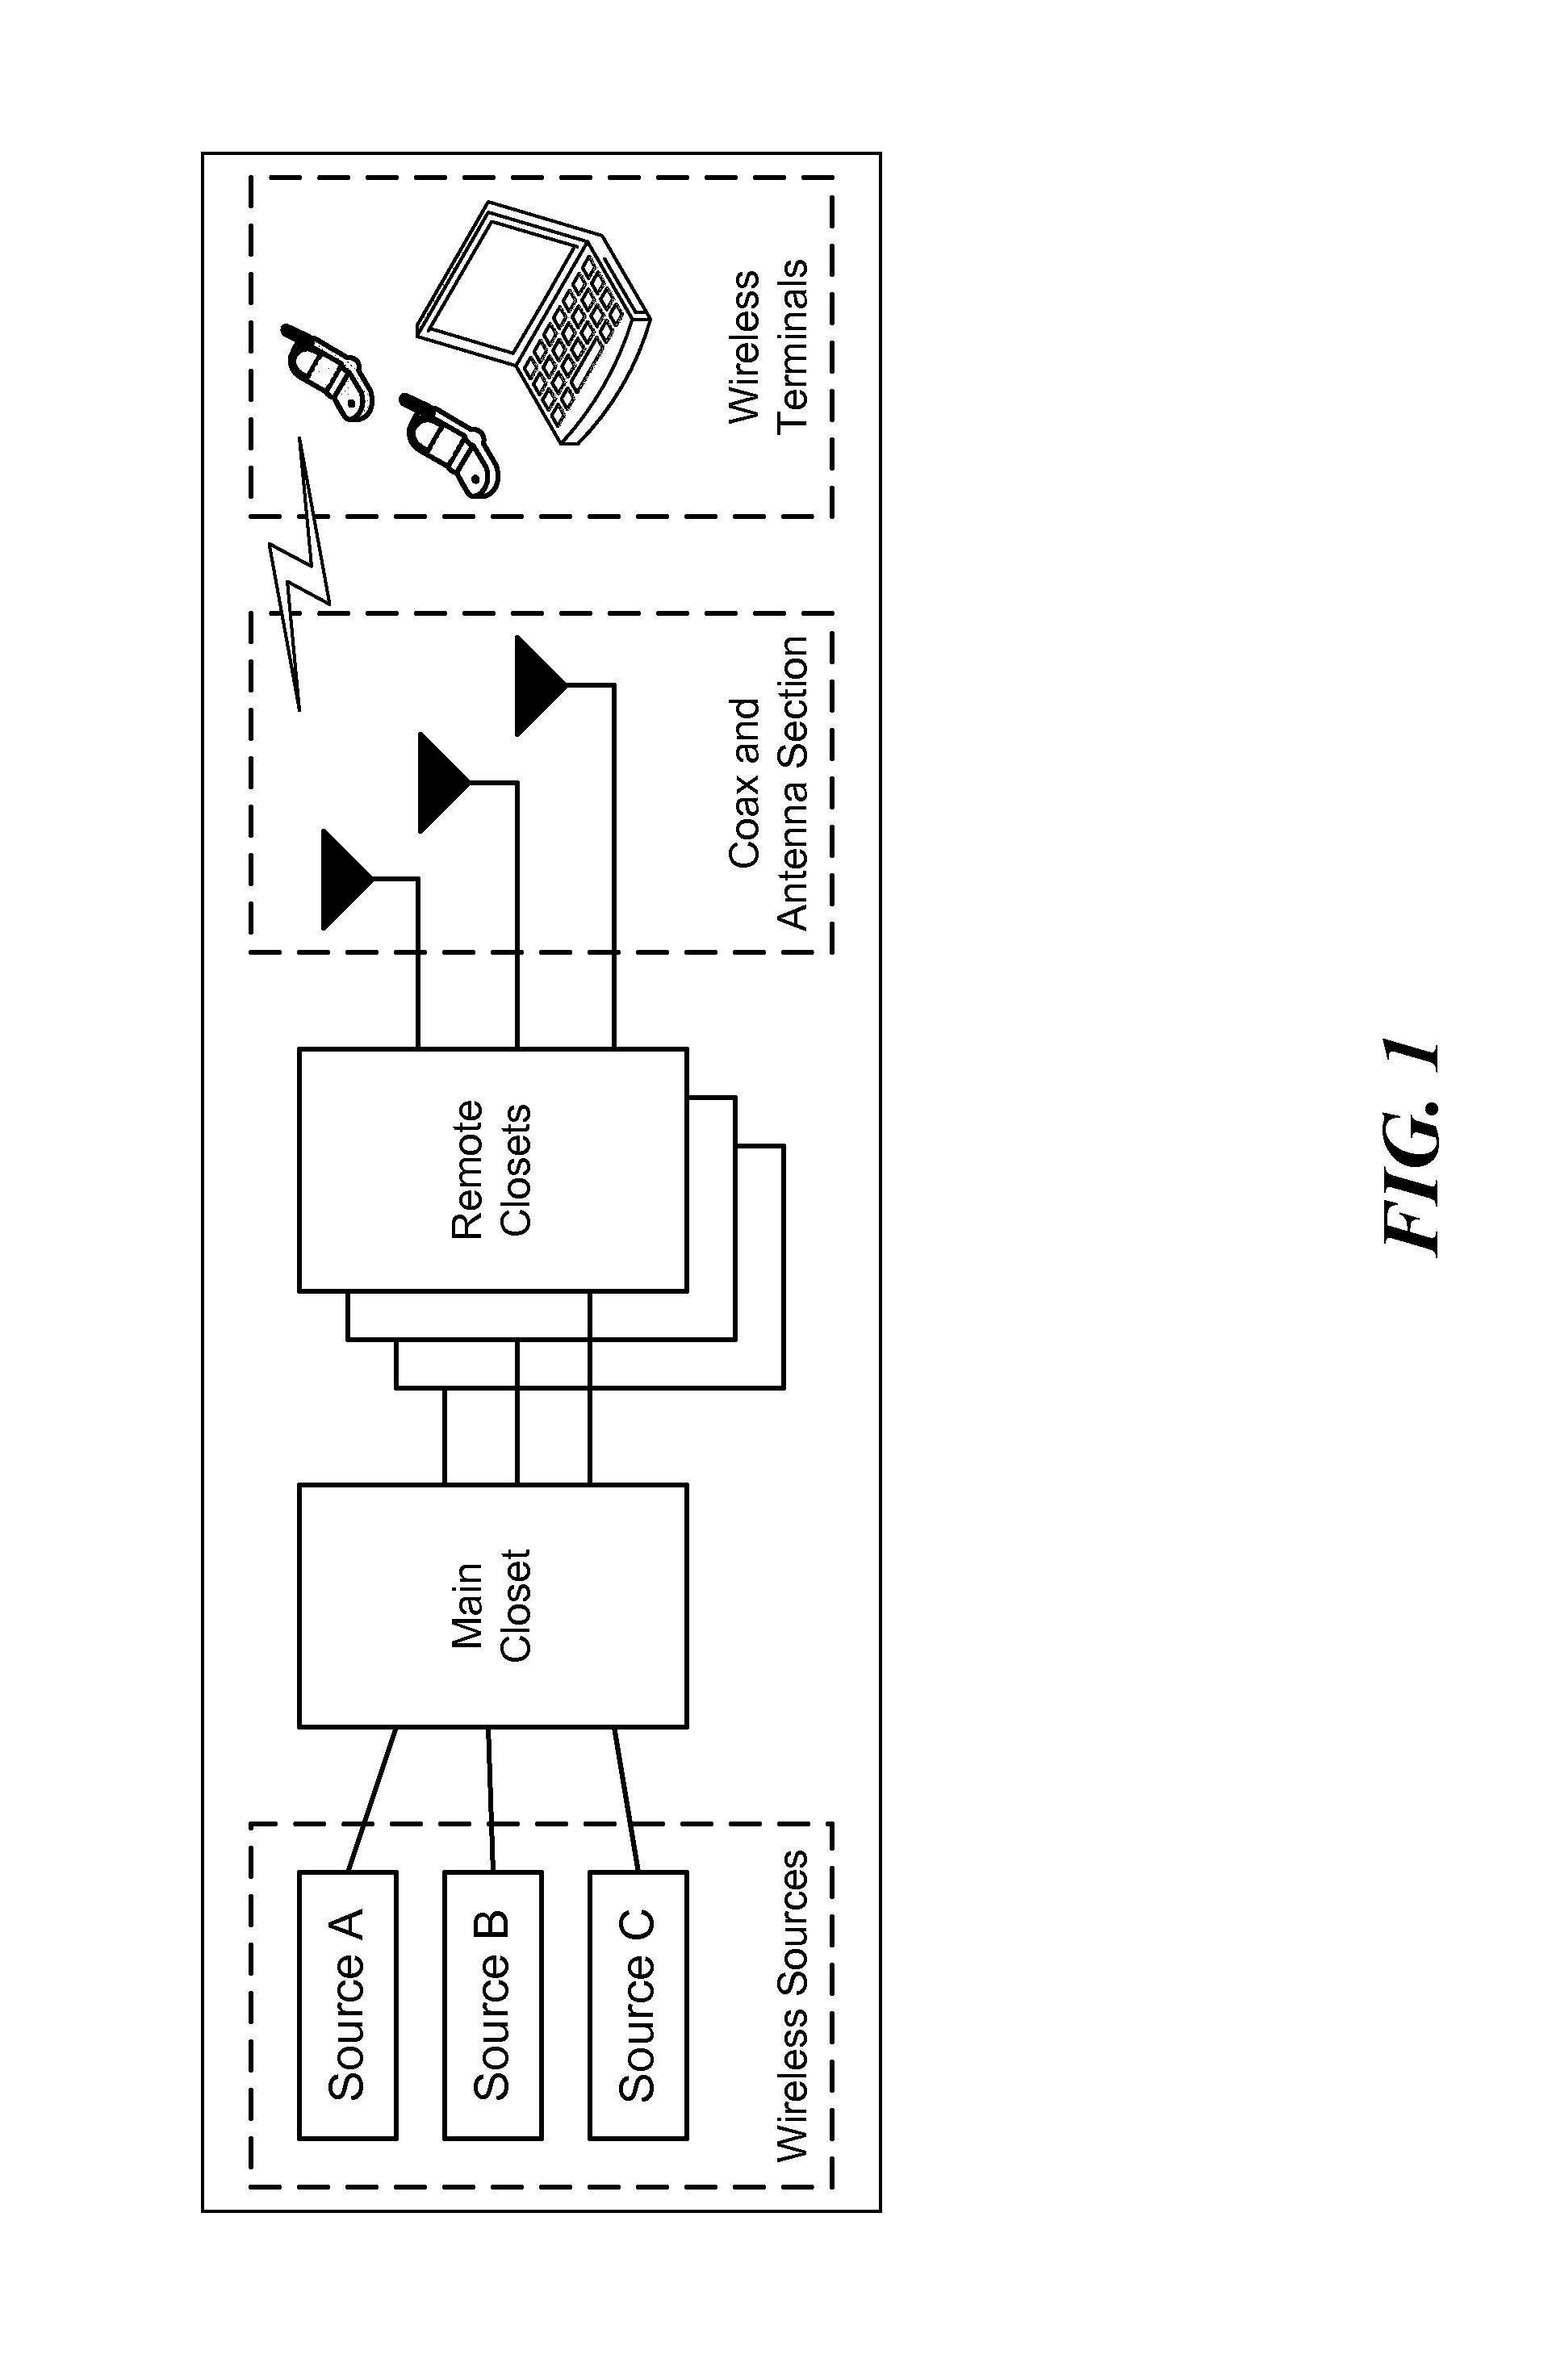 Method and System for Equalizing Cable Losses in a Distributed Antenna System